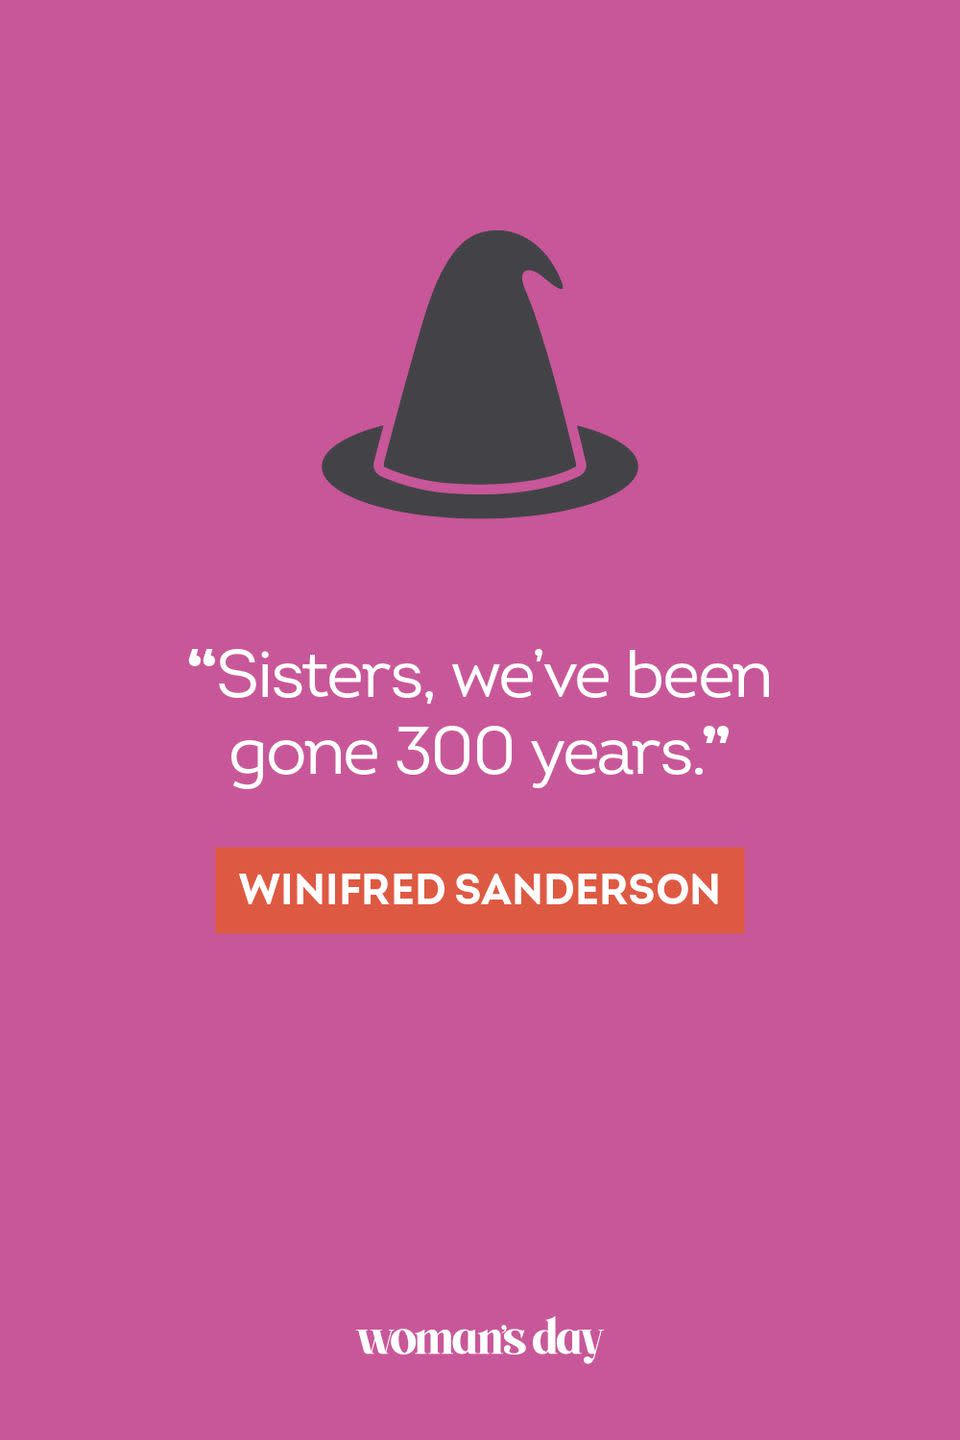 <p>“Sisters, we’ve been gone 300 years.” — Winifred Sanderson</p>